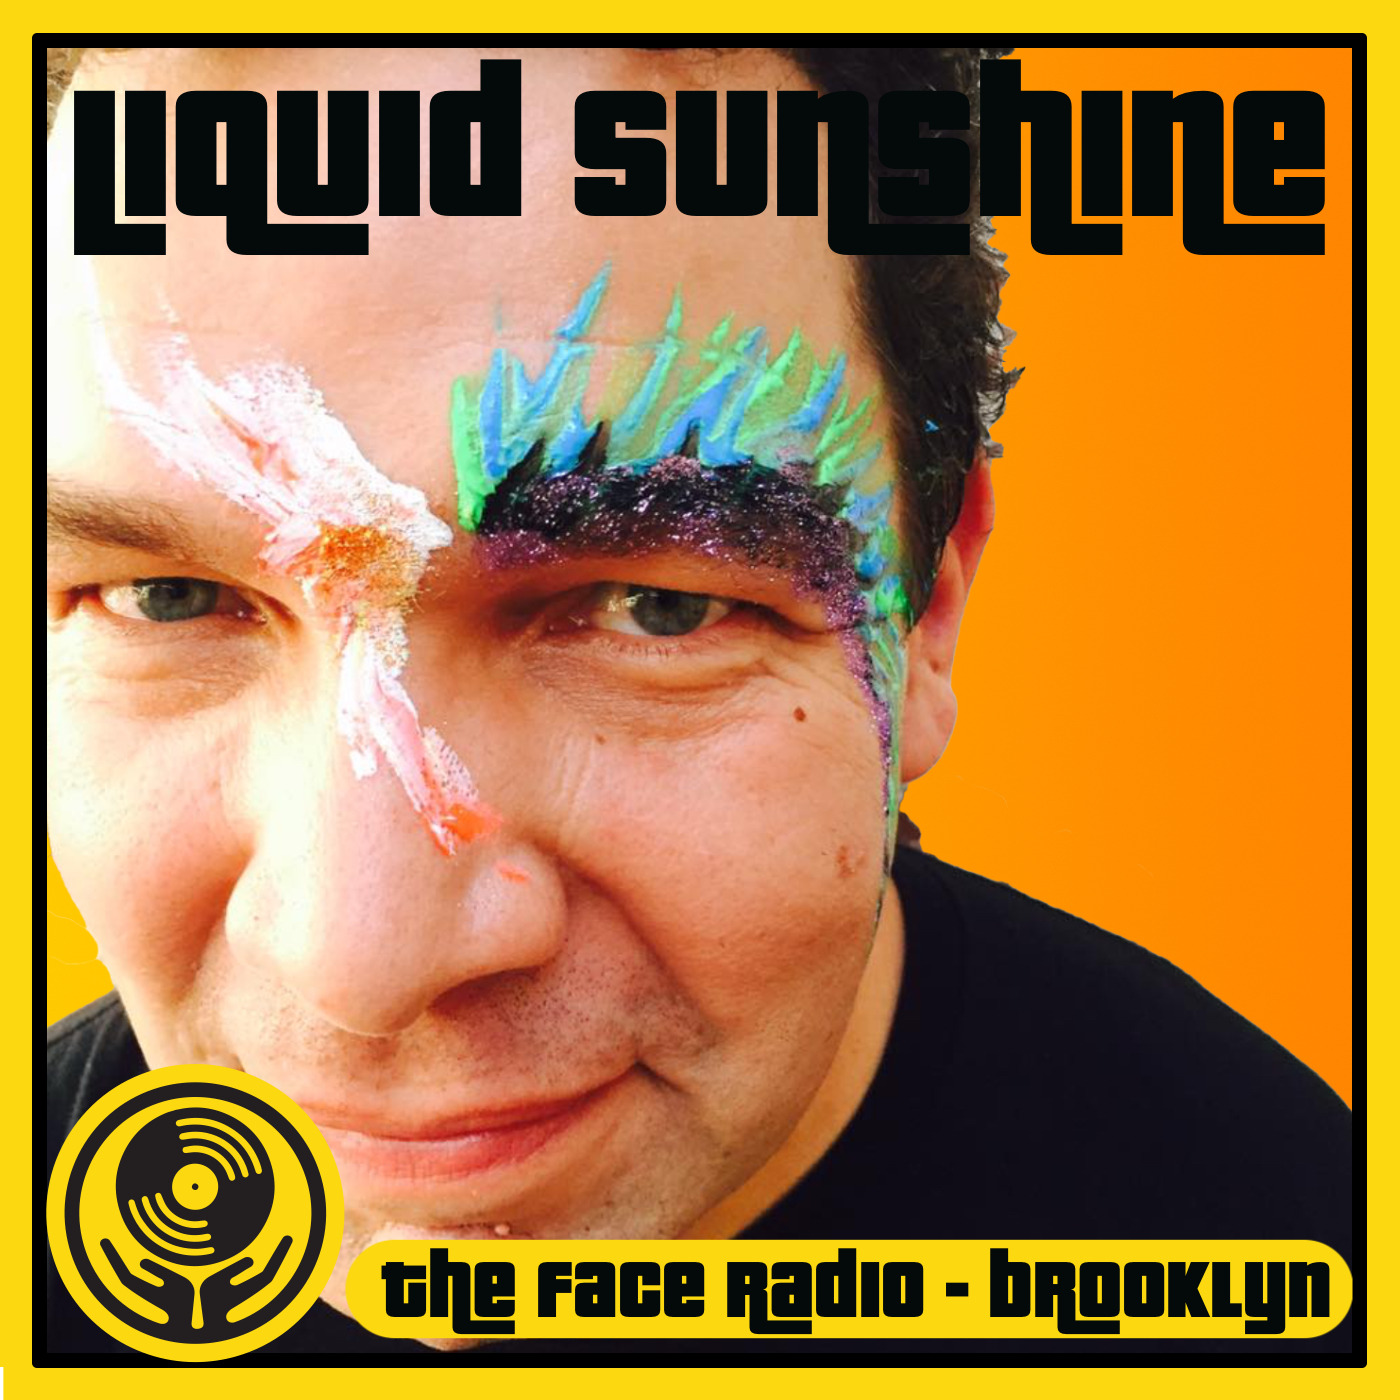 Summer House - We gonna Ring-Rang-A-Dong for a Holiday - Liquid Sunshine @ The Face Radio - Show#162